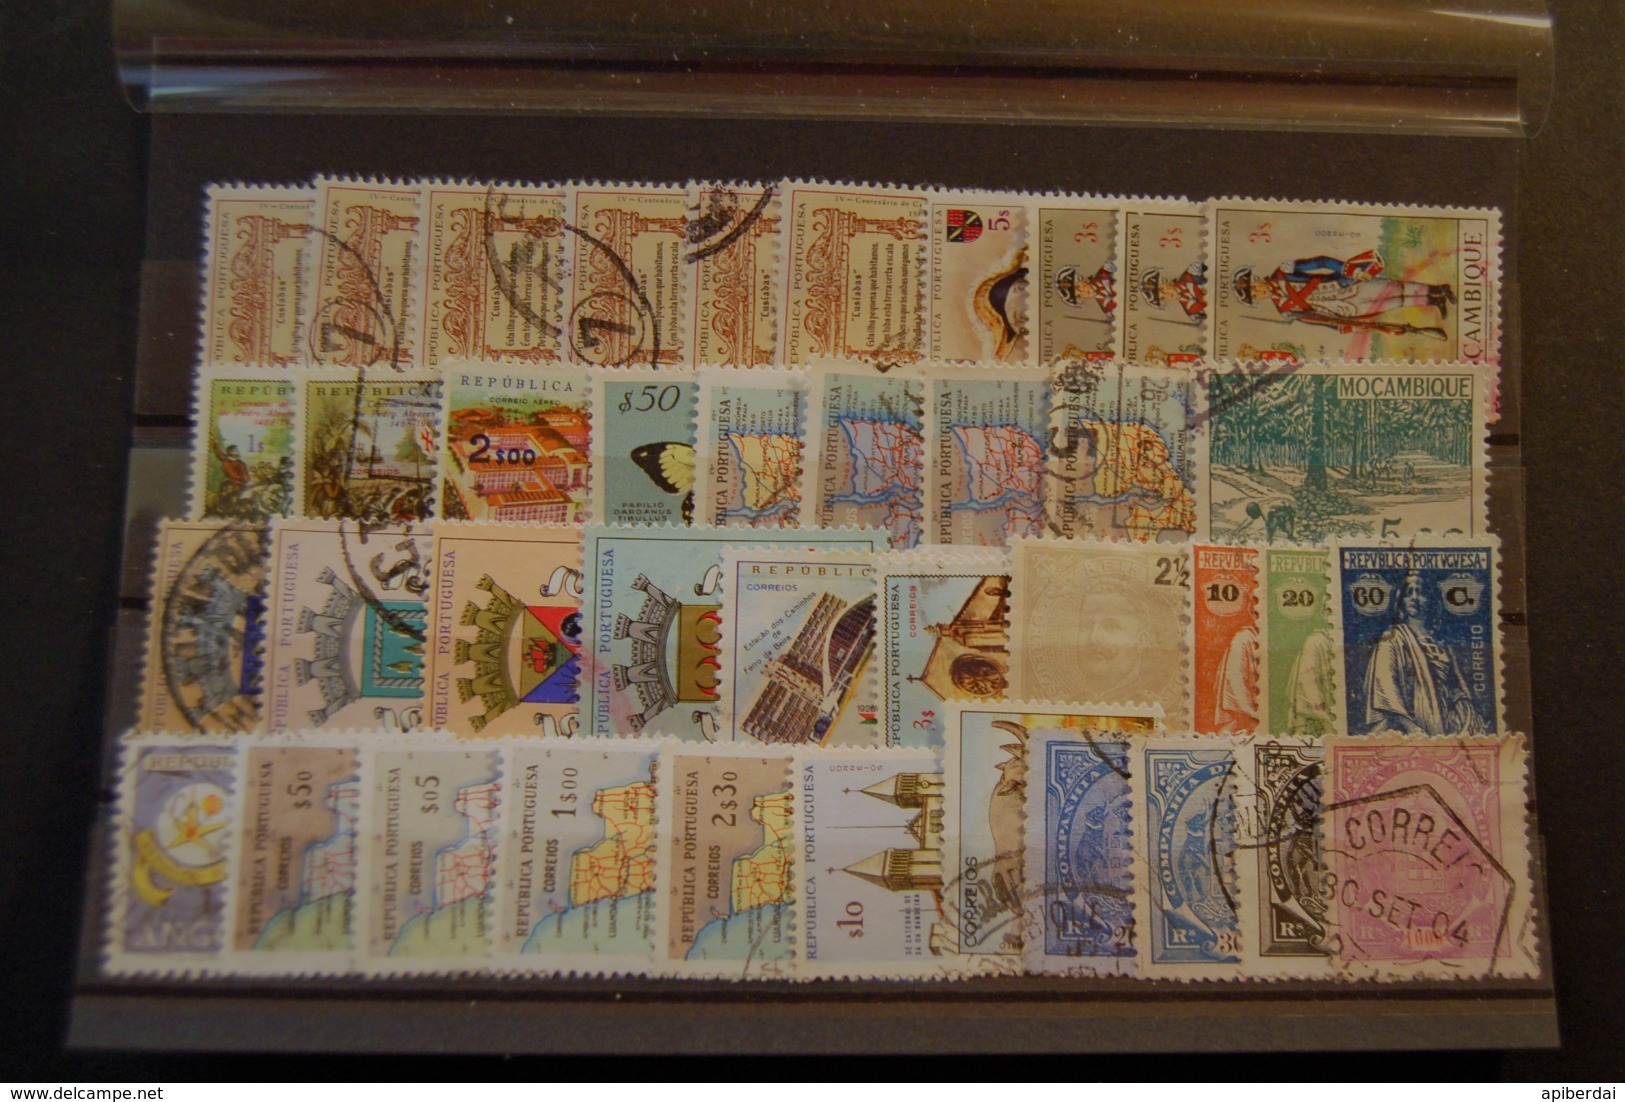 Mocambique  Mozambique - Small Batch Of 40 Stamps Used - Mozambique